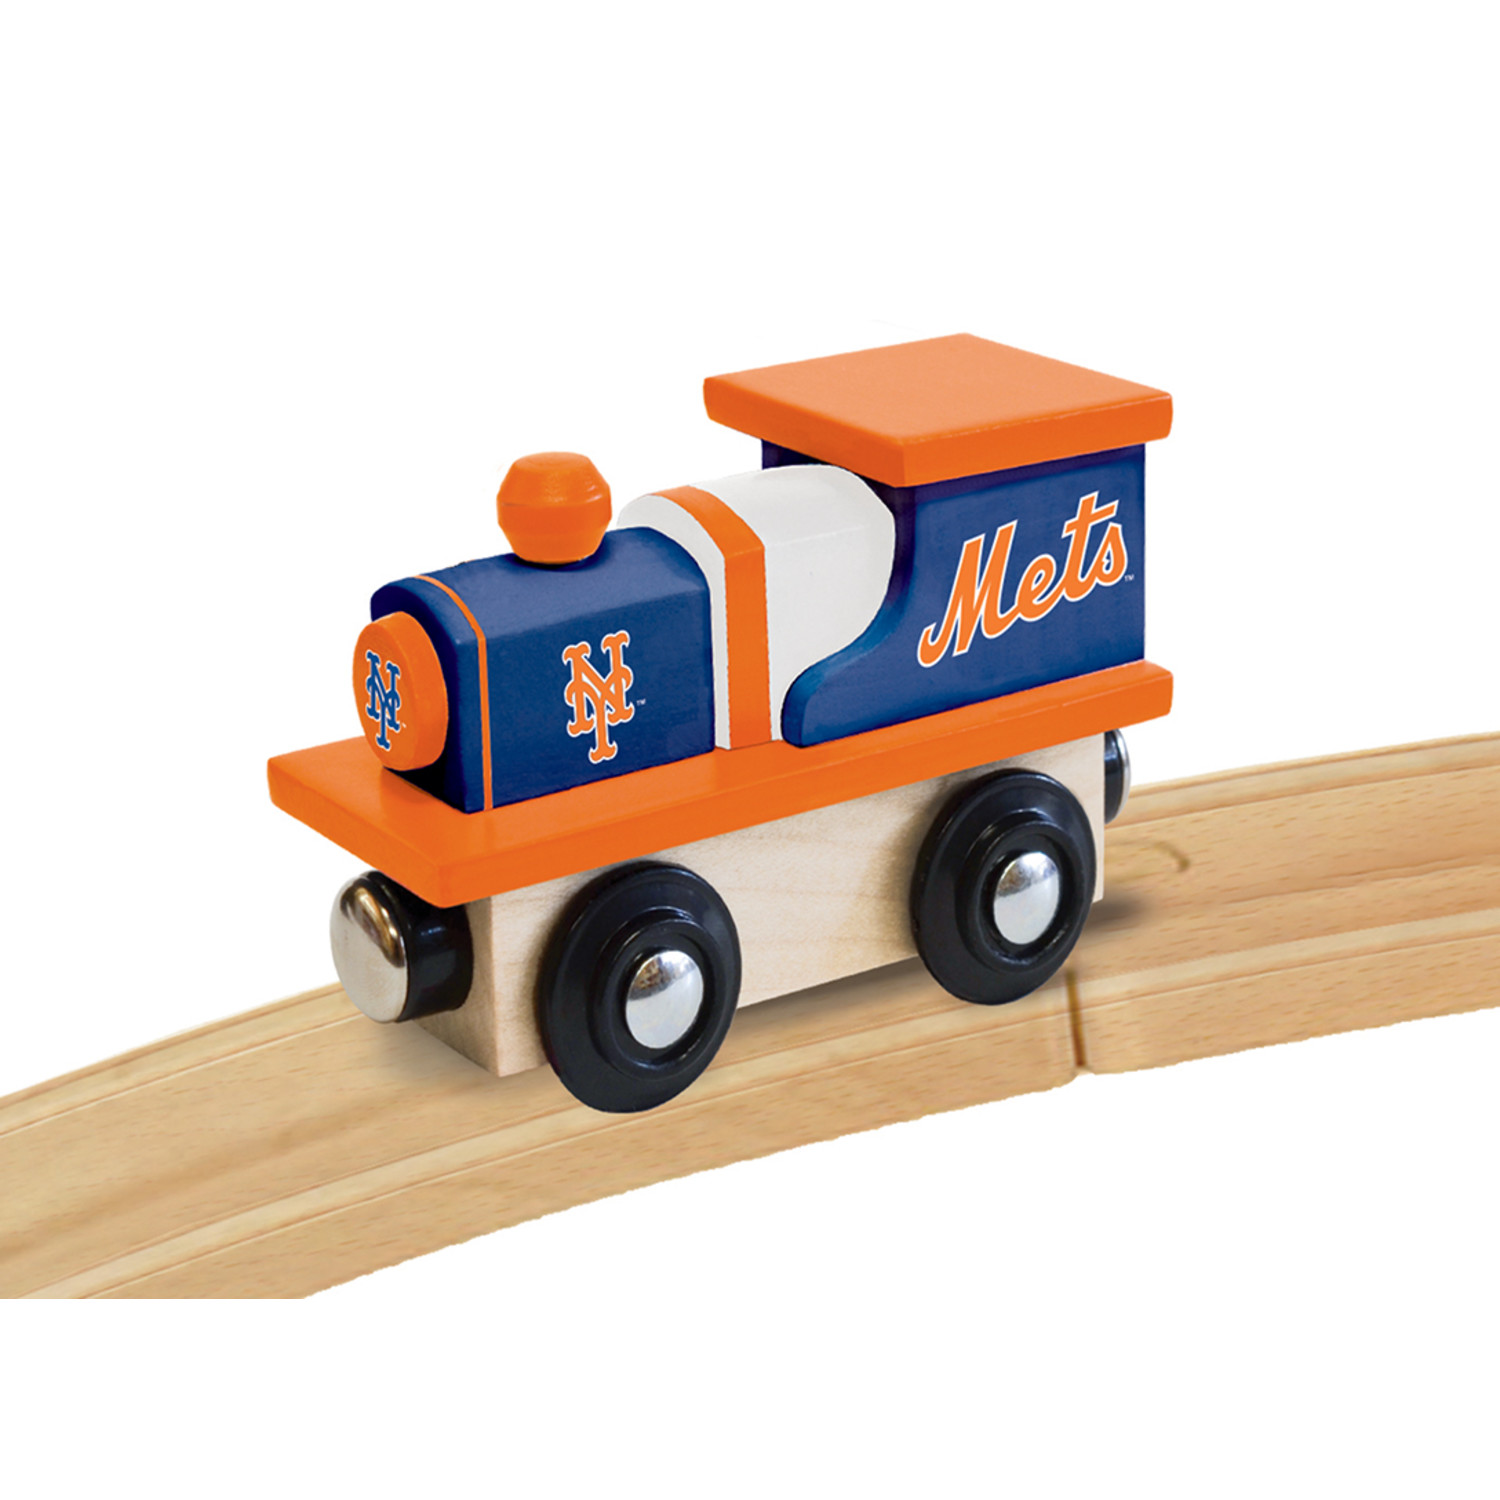 MasterPieces Officially Licensed MLB New York Mets Wooden Toy Train Engine For Kids - image 5 of 5